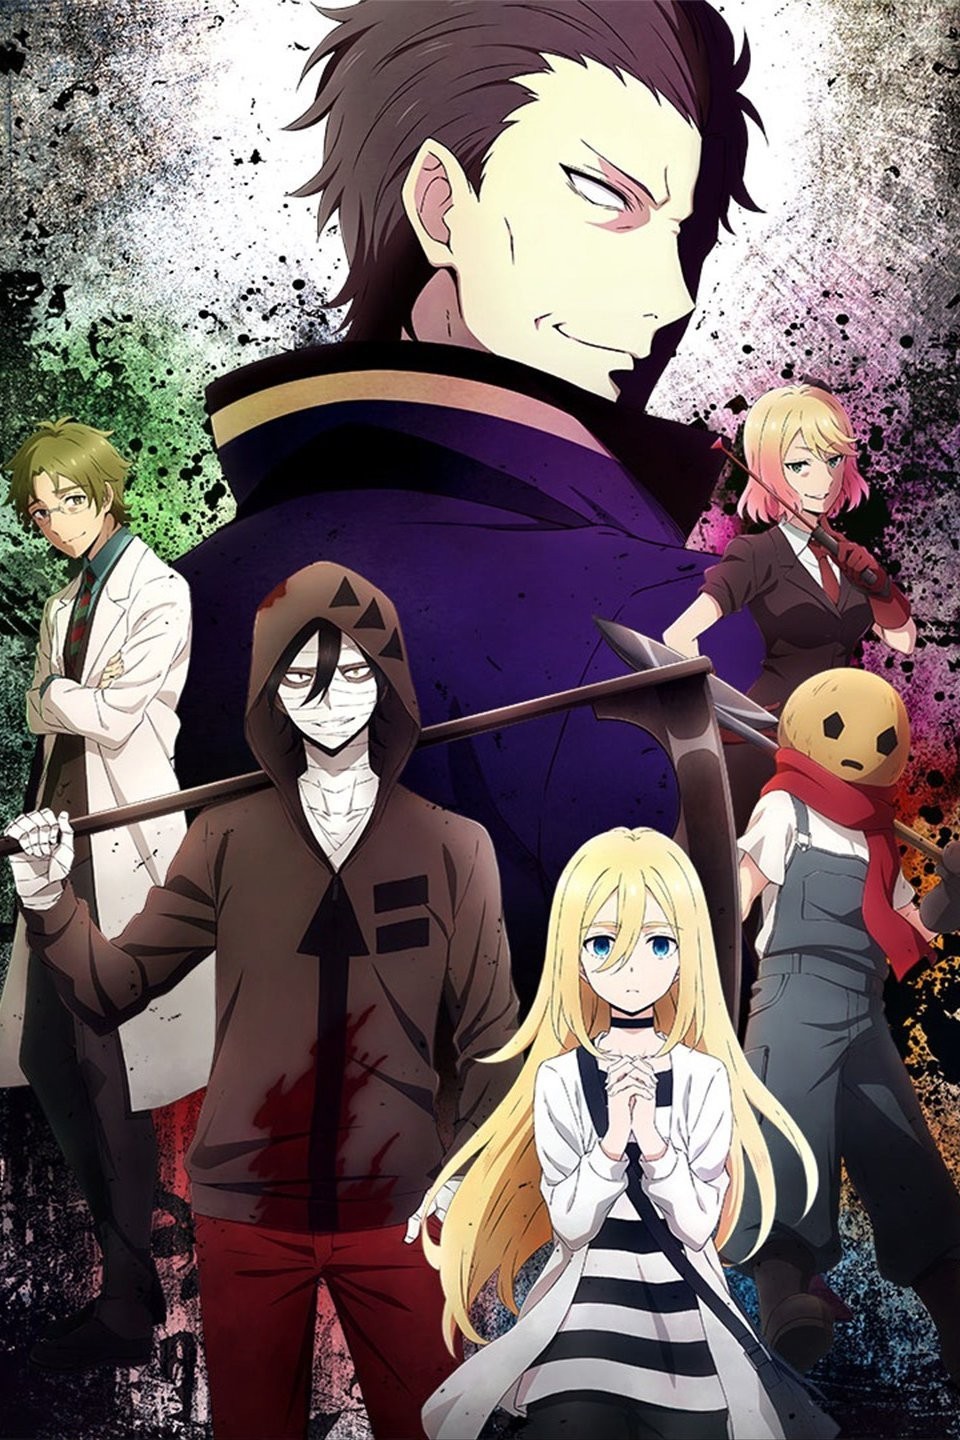 Angels of Death - Rotten Tomatoes